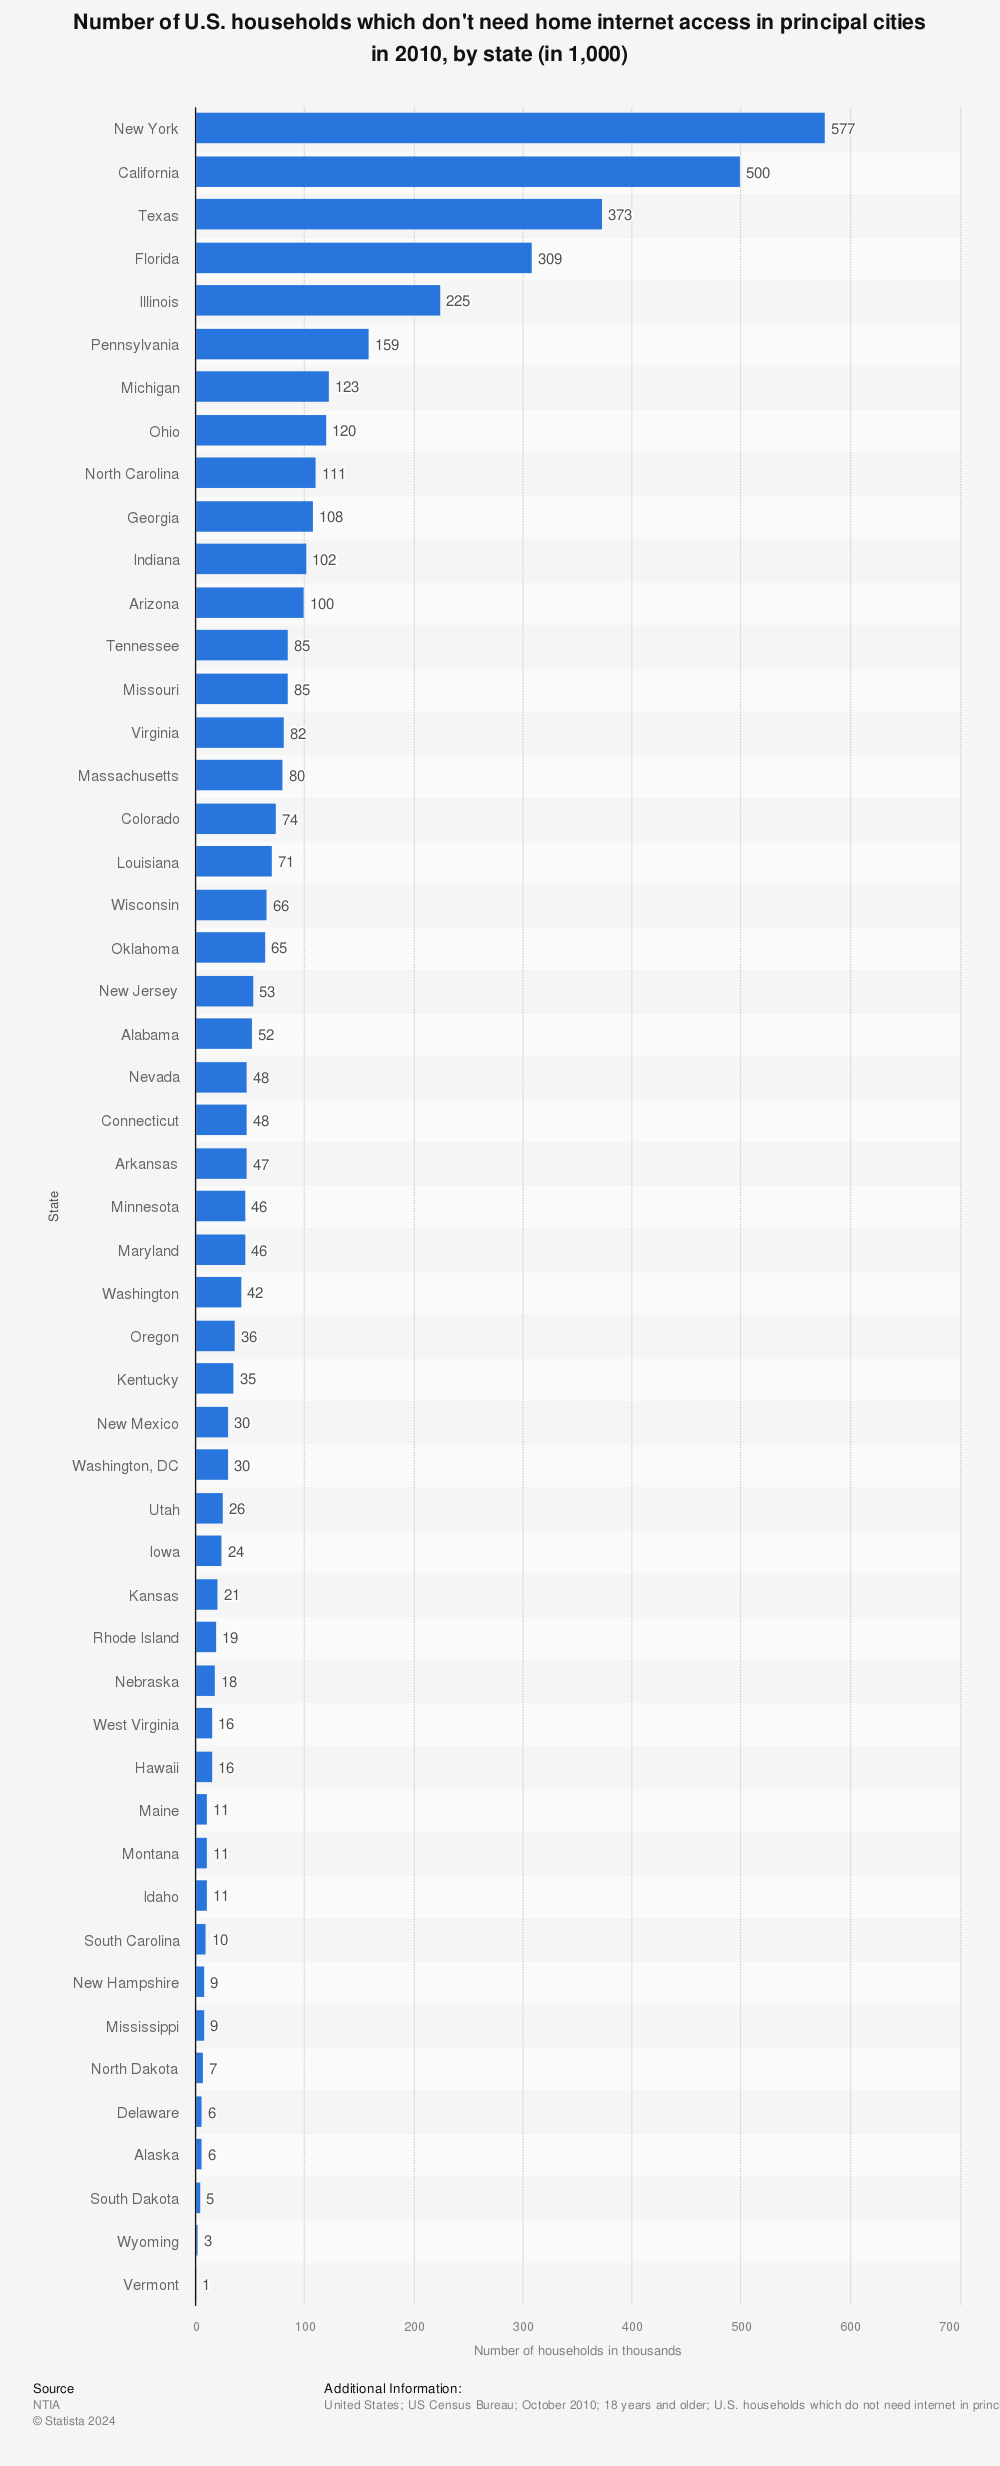 Statistic: Number of U.S. households which don't need home internet access in principal cities in 2010, by state (in 1,000) | Statista